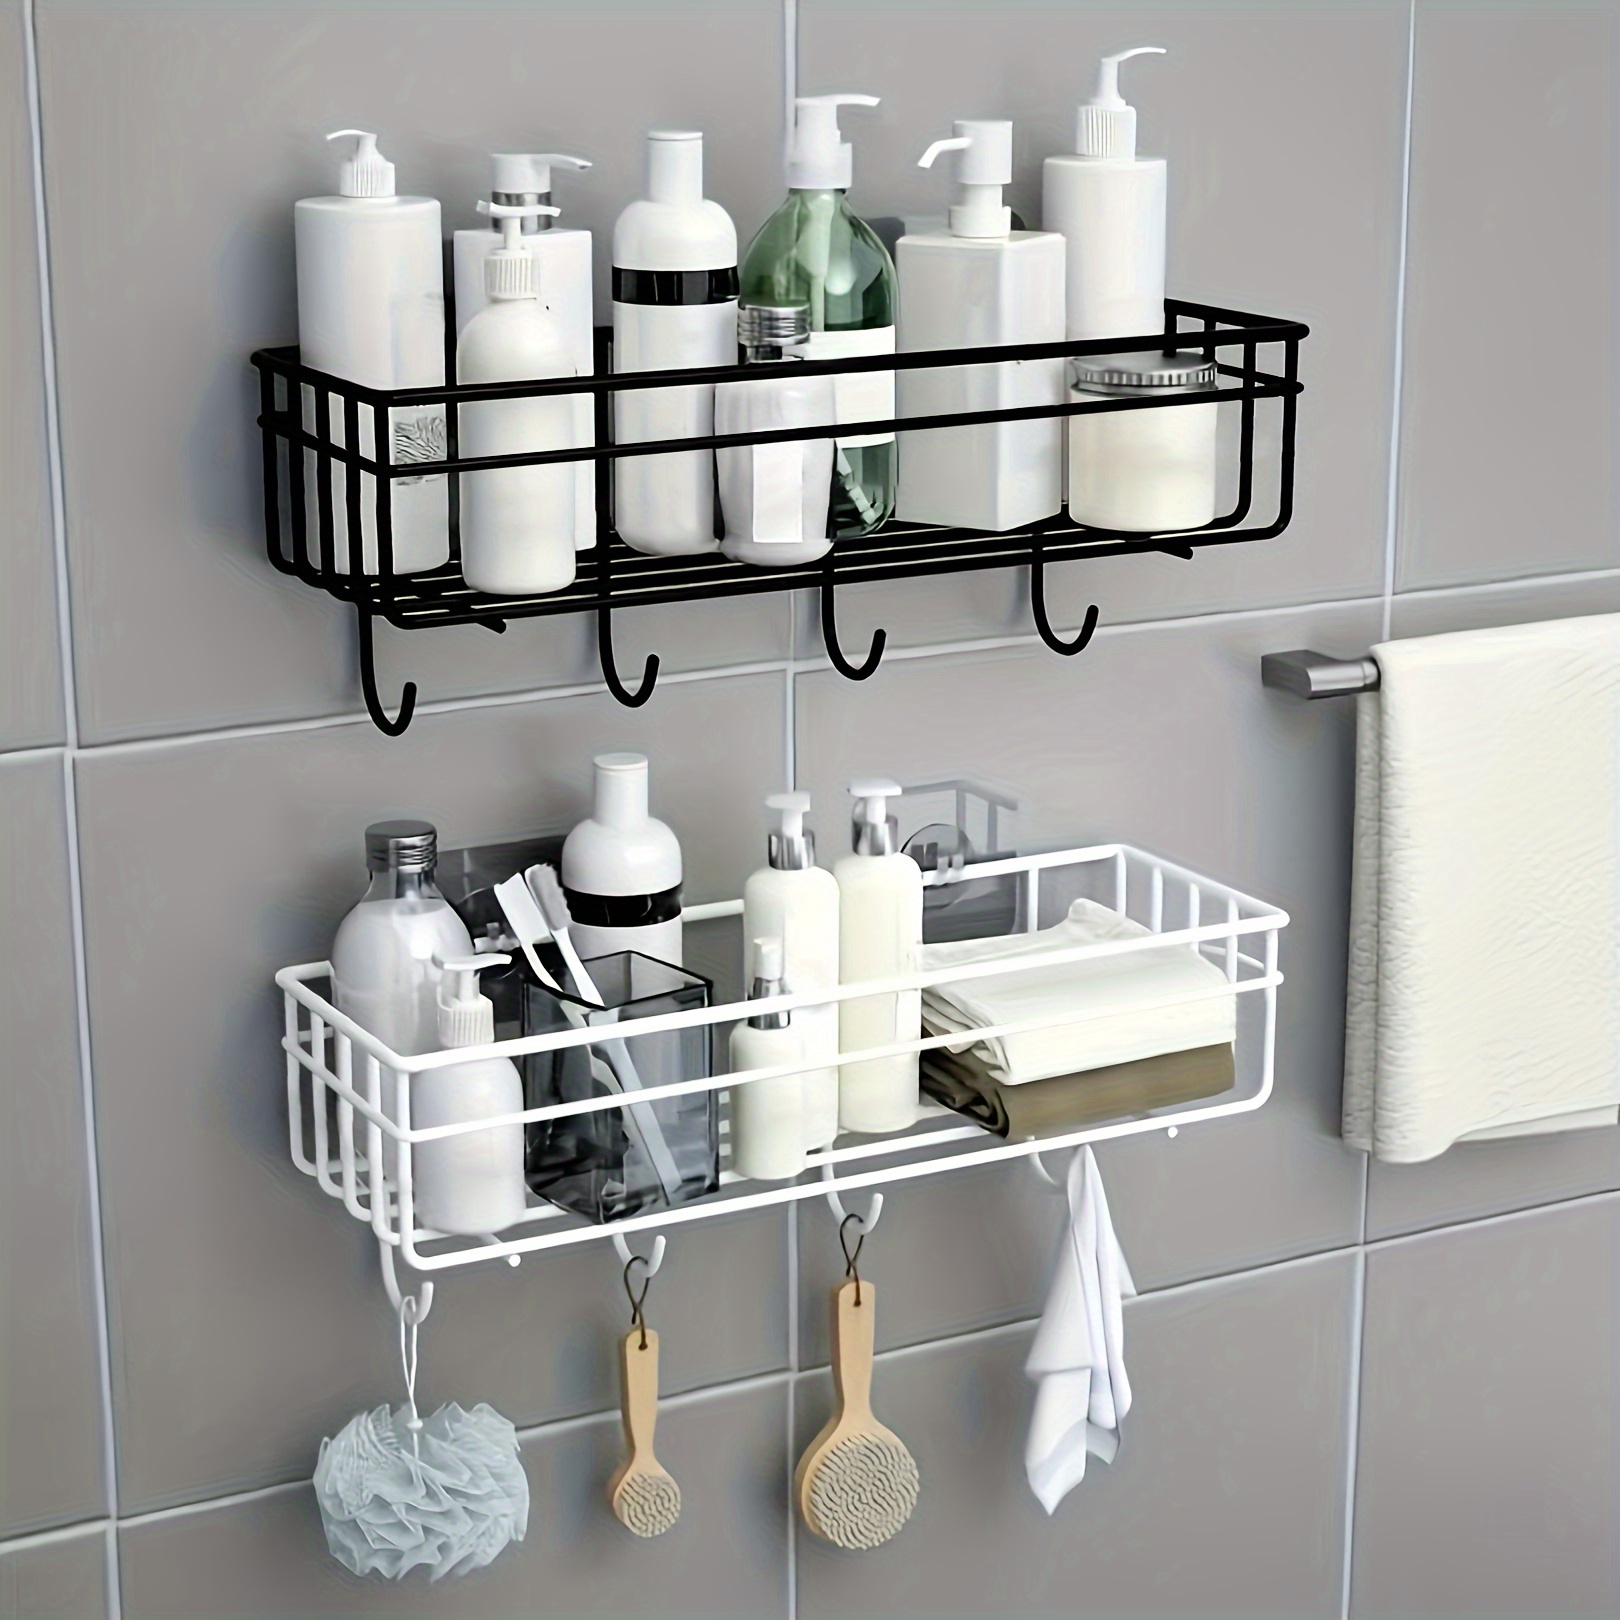 

Cast Iron Hanging Shelf, Wall Mounted Bathroom Organizer, Multifunctional Storage Rack For Kitchen, Strong Adhesive No-drill Installation, Modern Square Design.